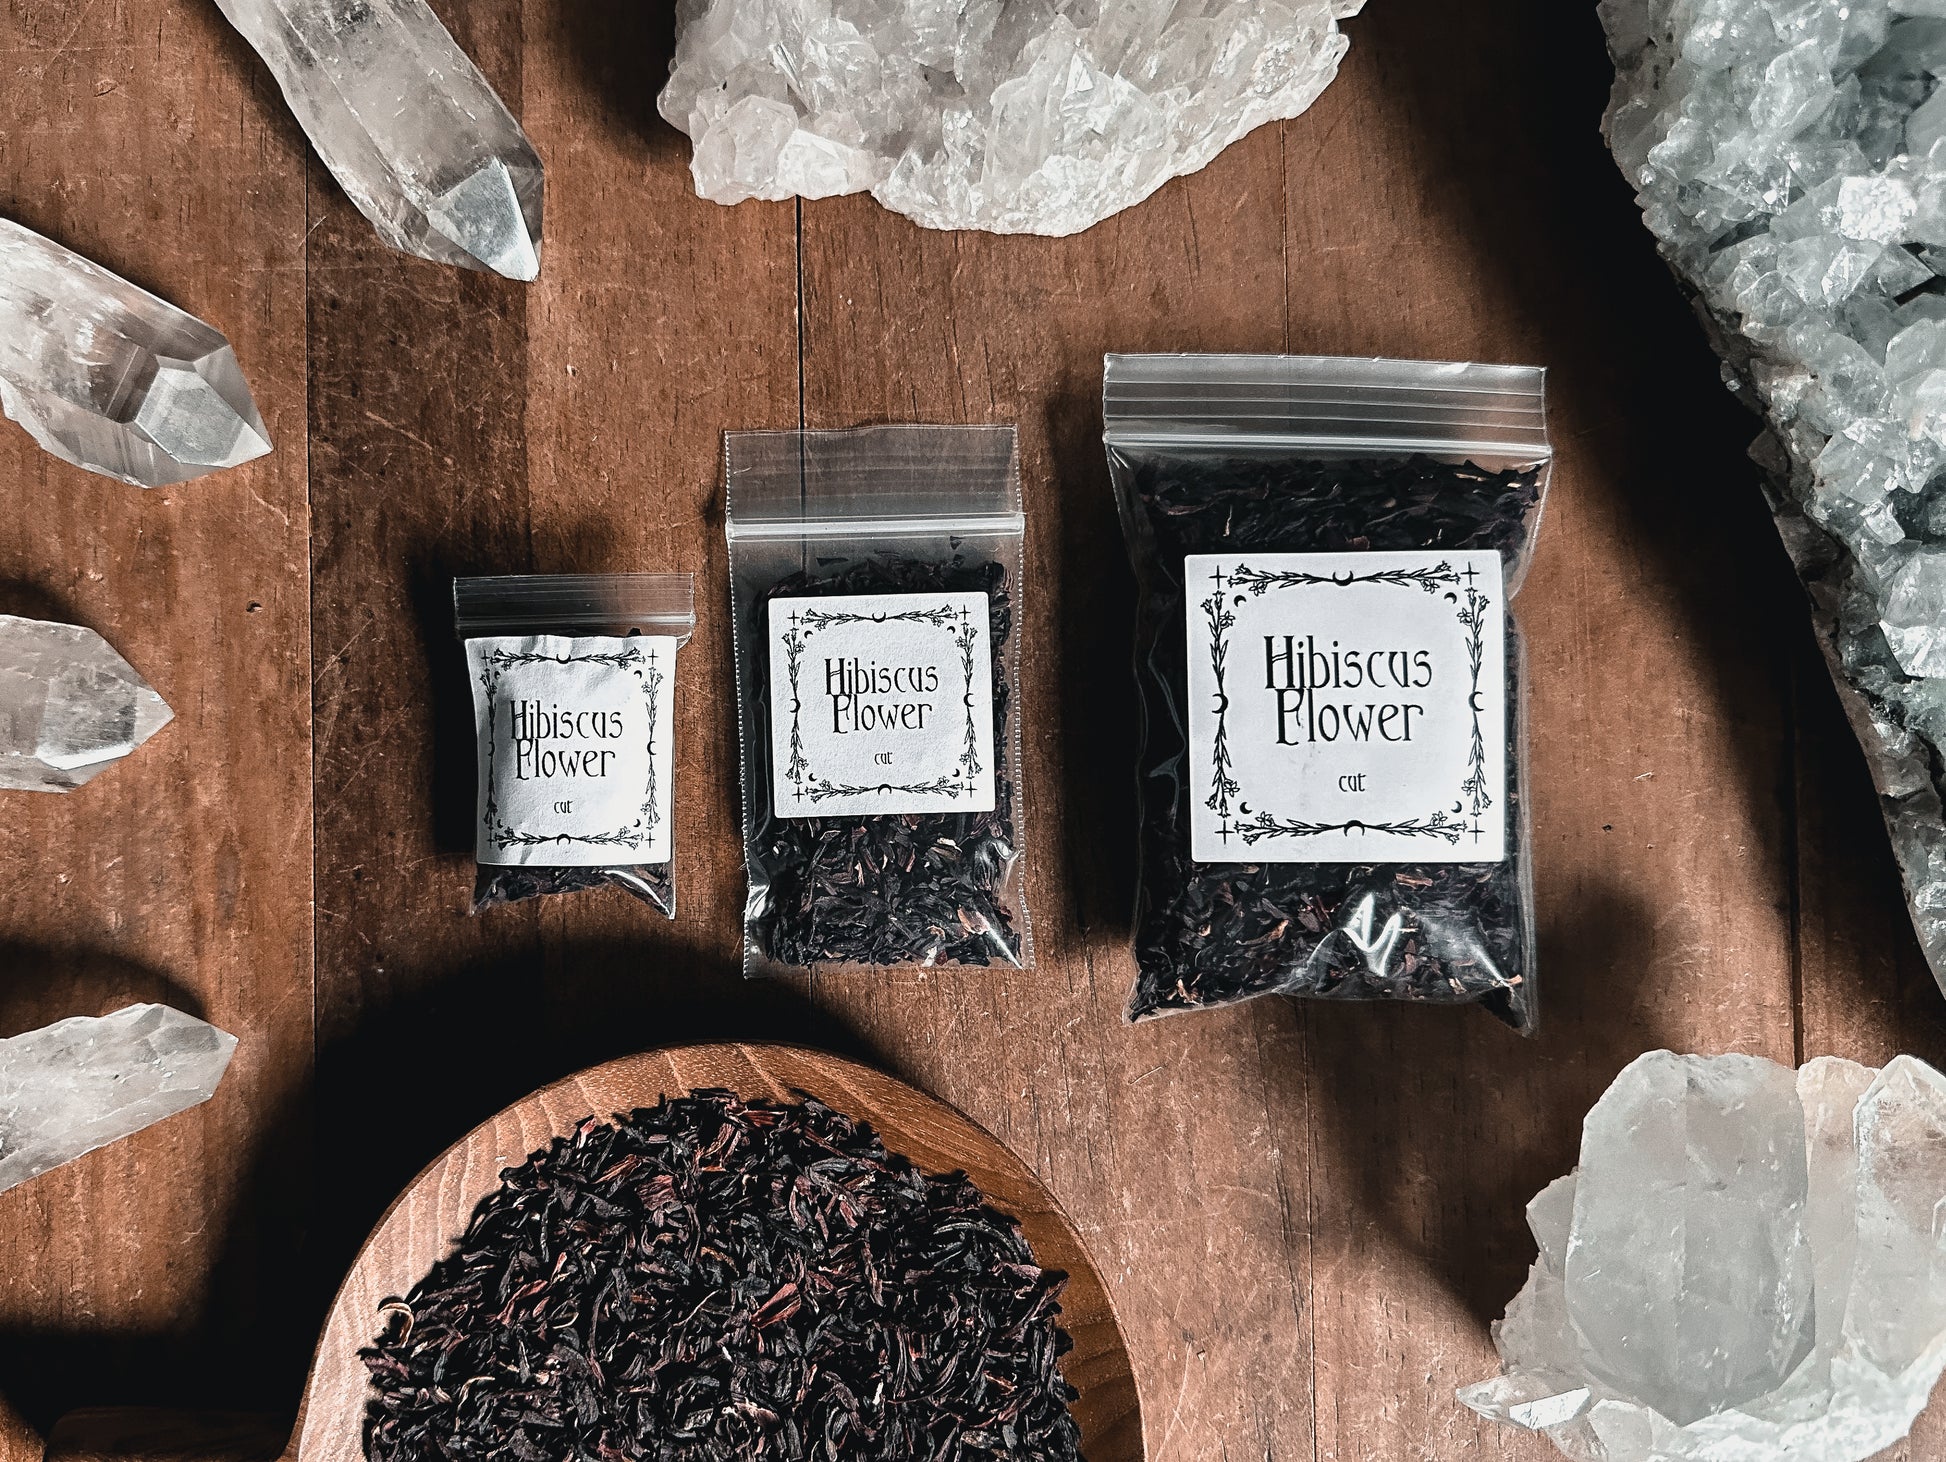 Canadian Ritual Herb Apothecary, sold in Bulk at The Stone Maidens. Witchy metaphysical Shop 